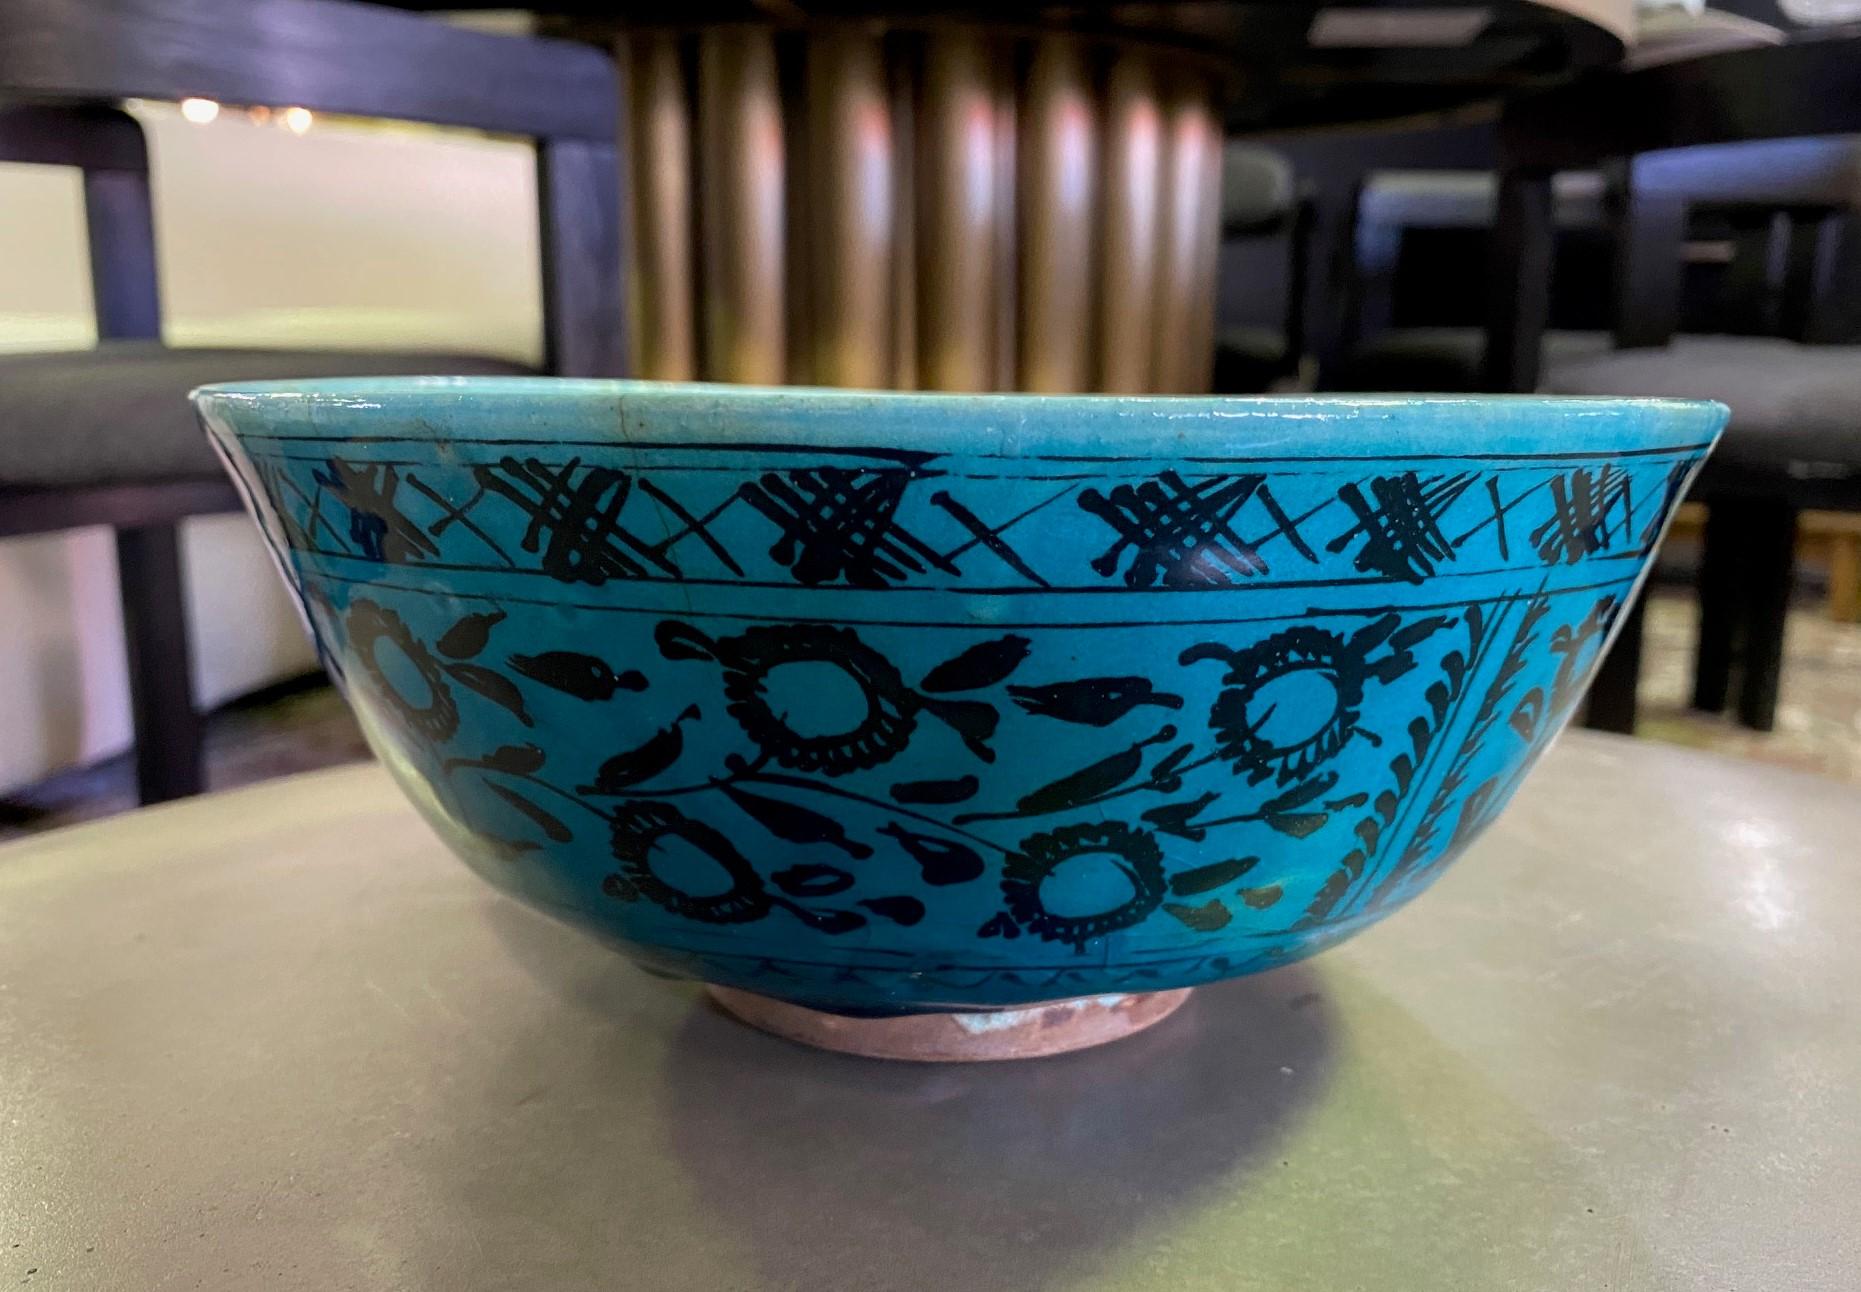 A gorgeous work, wonderfully designed, decorated, sumptuously glazed, and colored. 

A fantastic addition to any collection or setting. Truly eyecatching.

We are listing it as 20th century but could be older.

Dimensions: 3.85